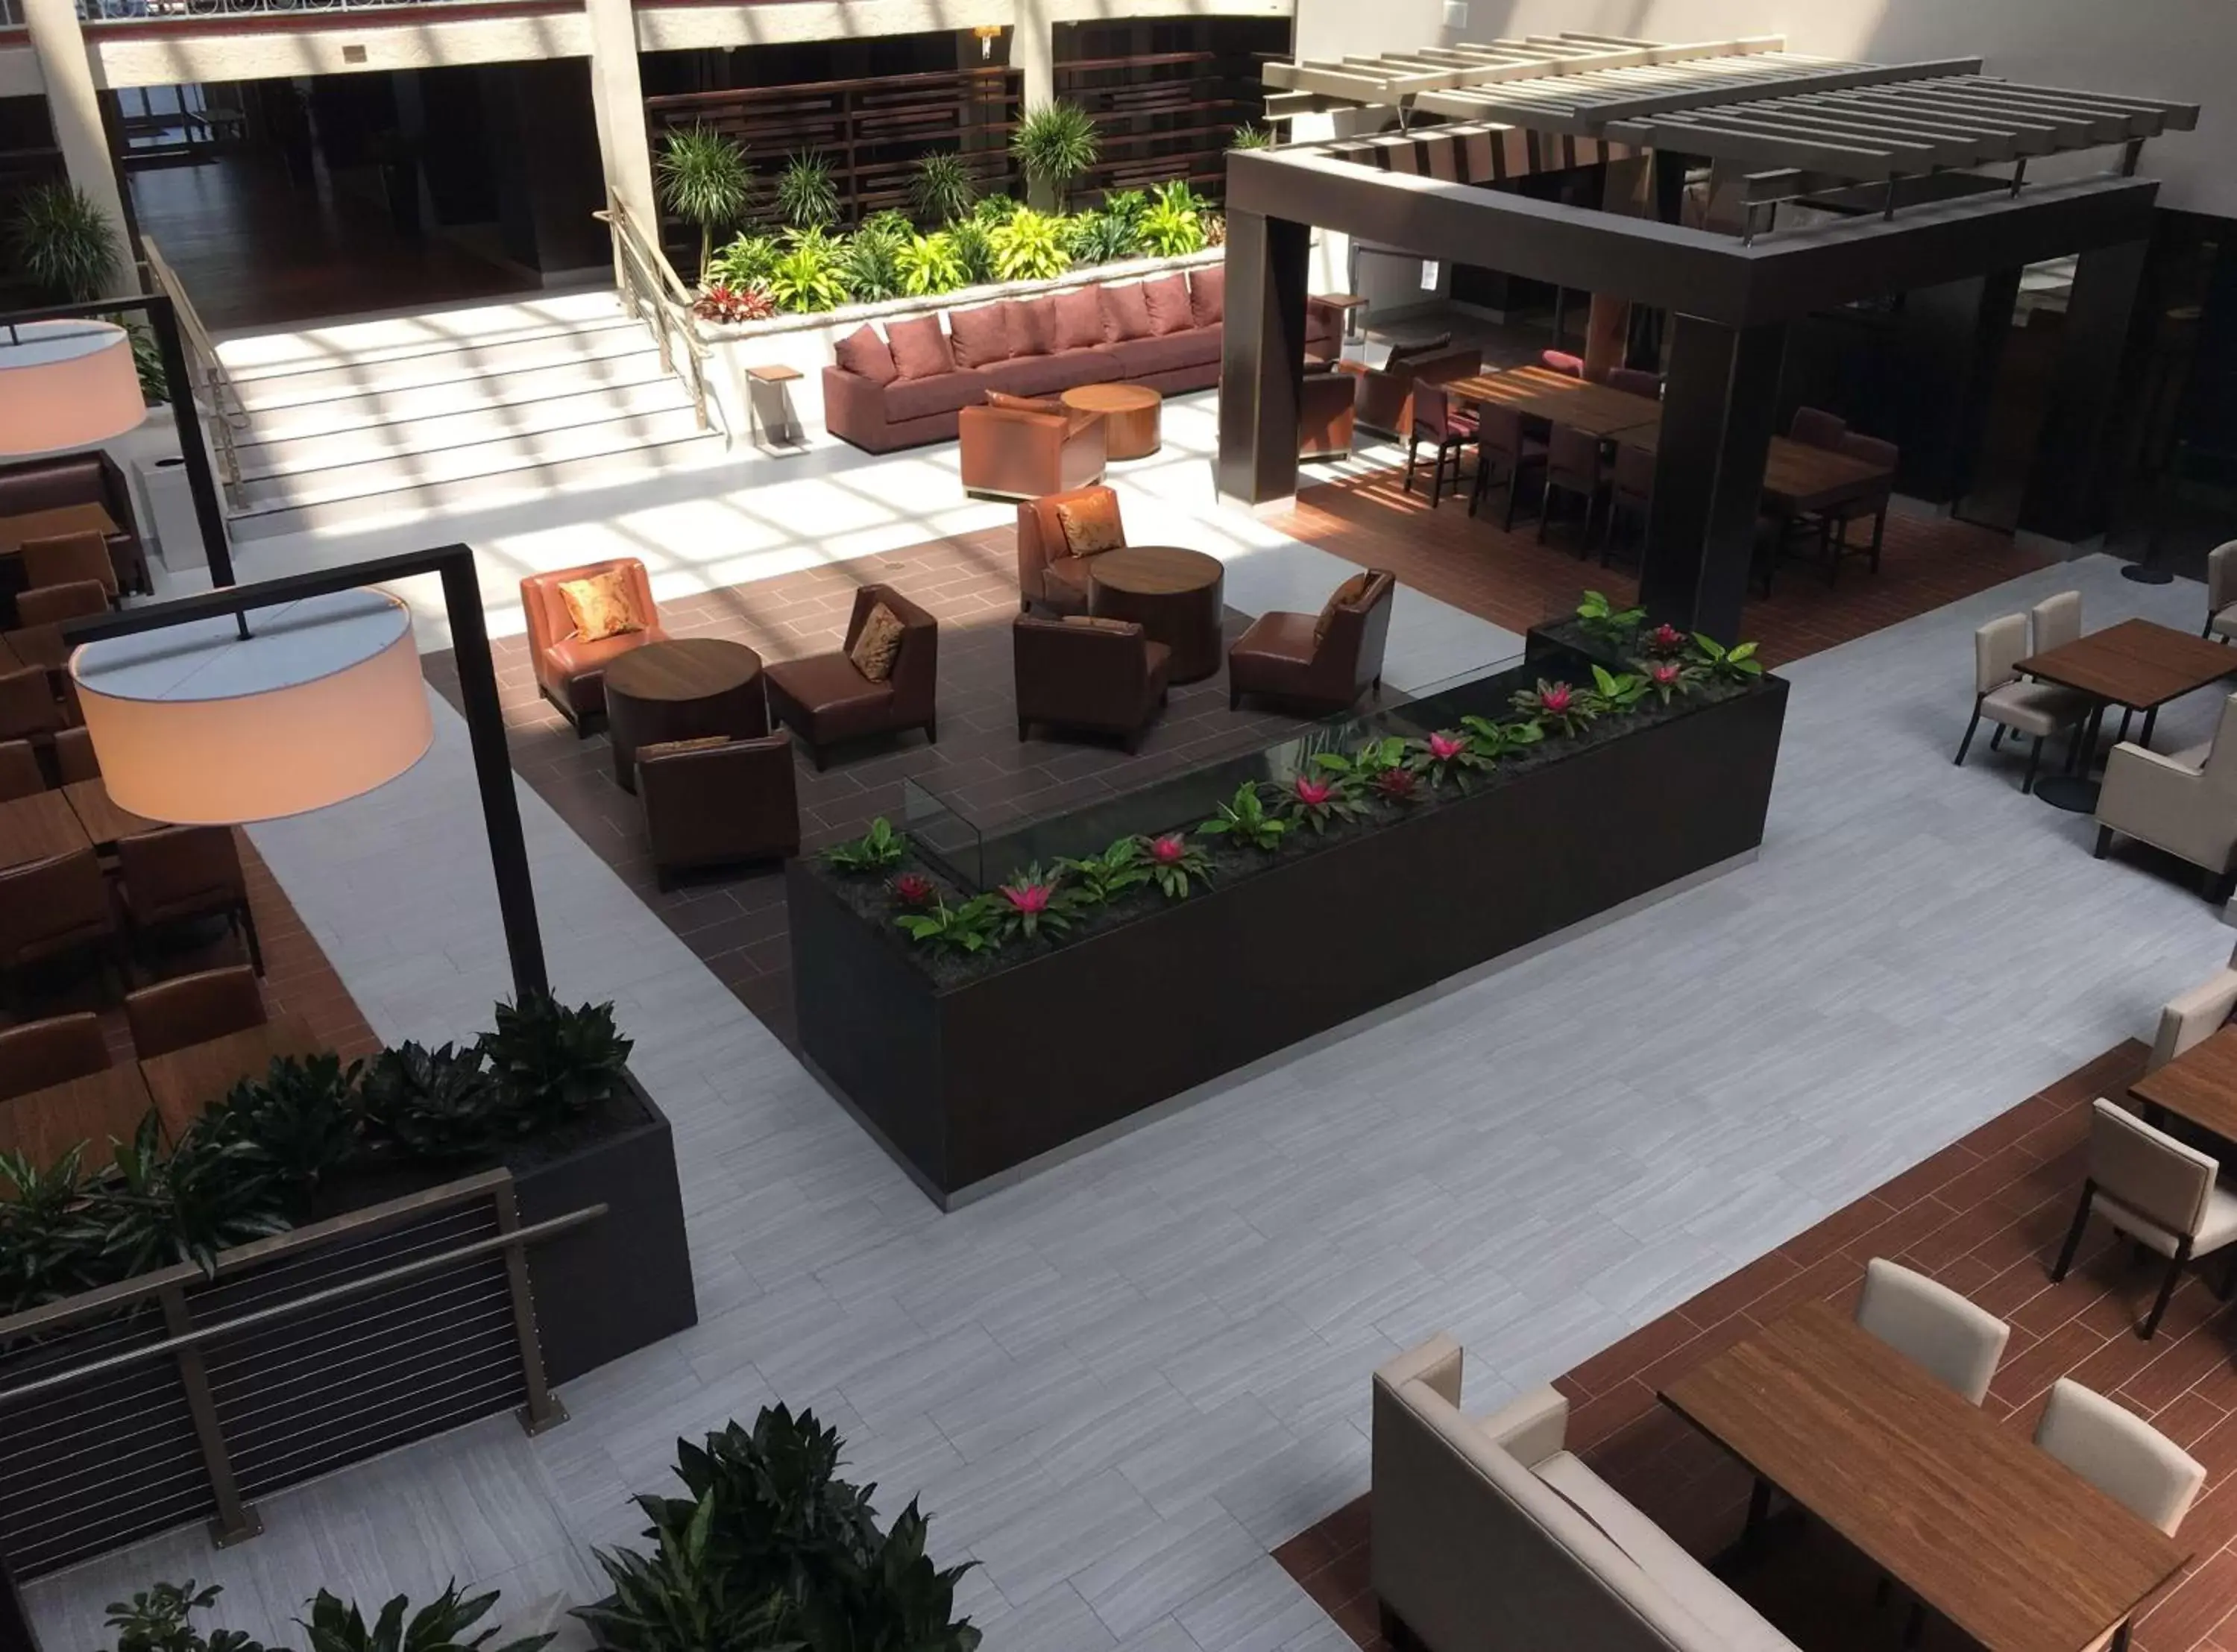 Lobby or reception in Embassy Suites by Hilton Denver Tech Center North